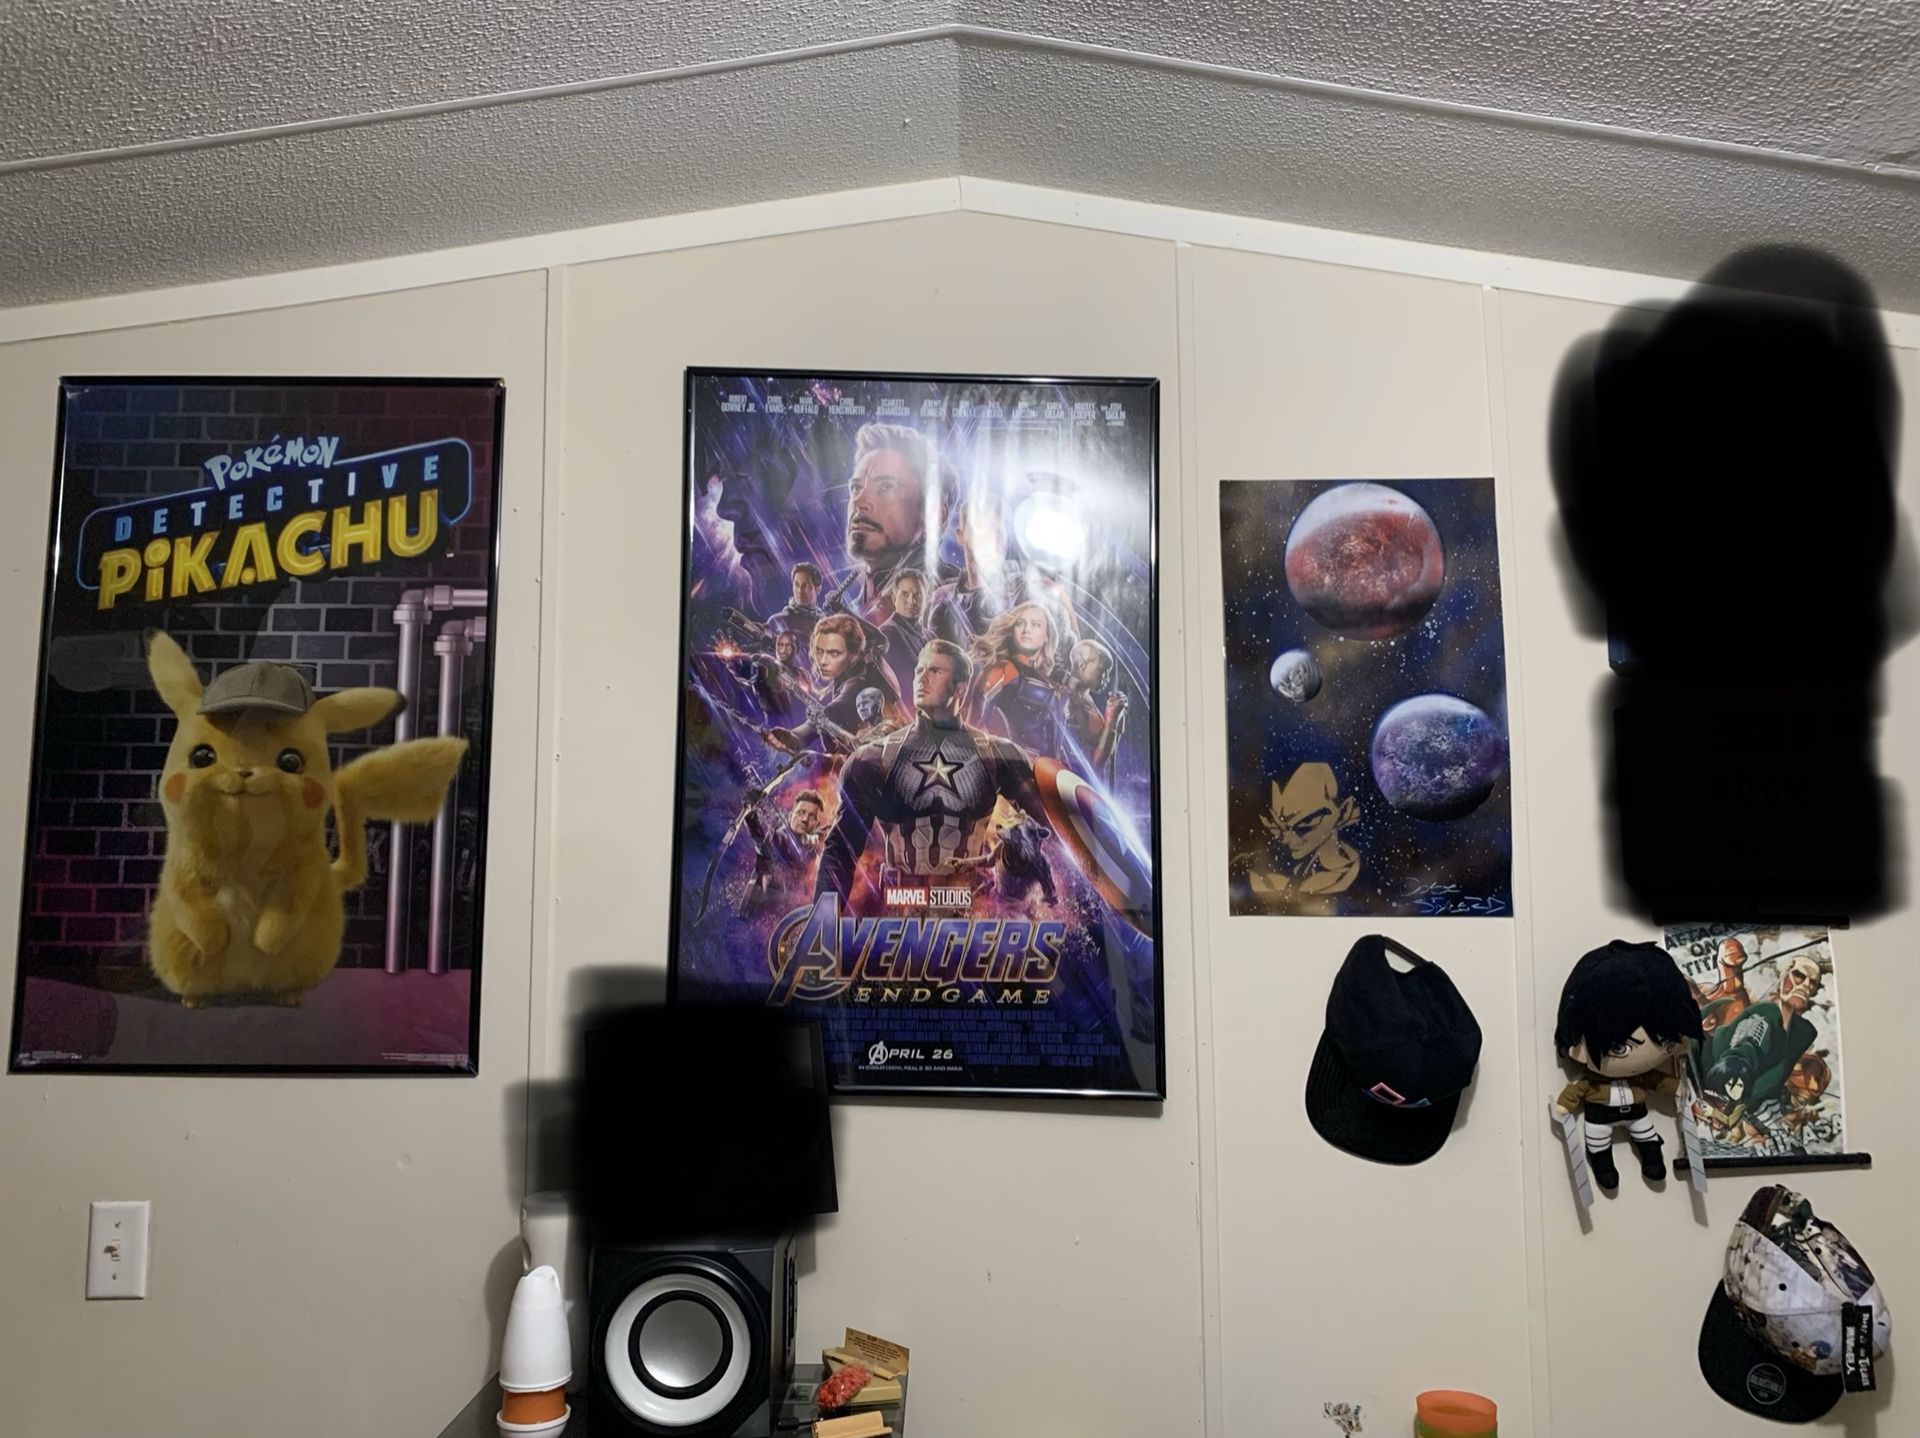 Anime posters